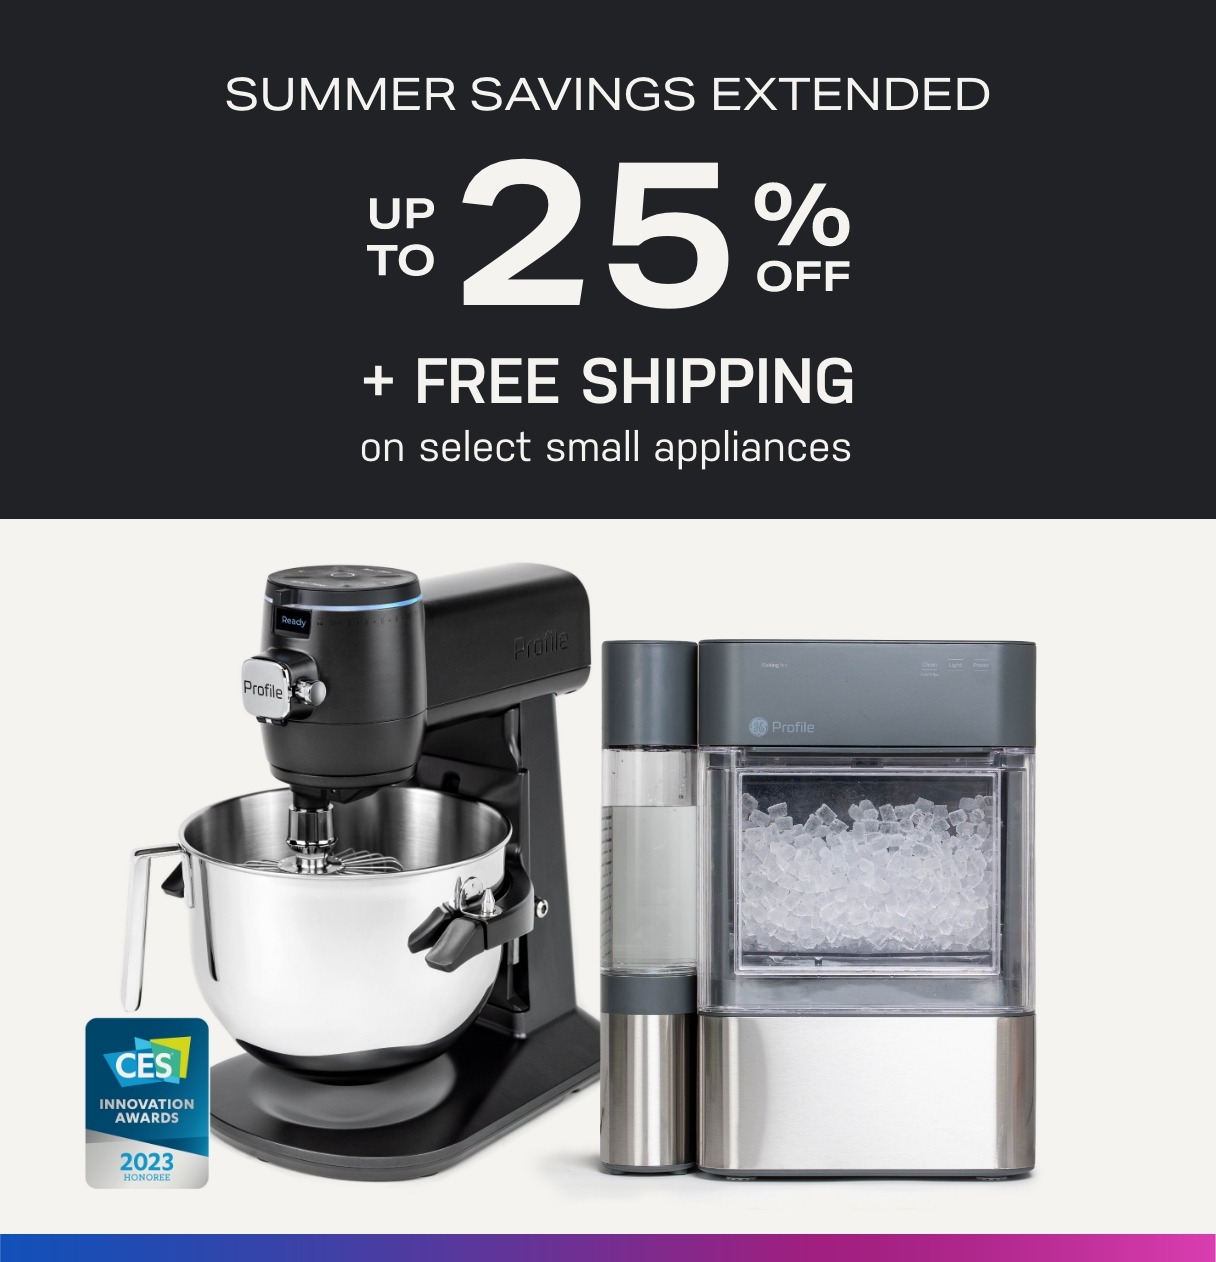 Save up to 25% OFF select GE & GE Profile Small Appliances